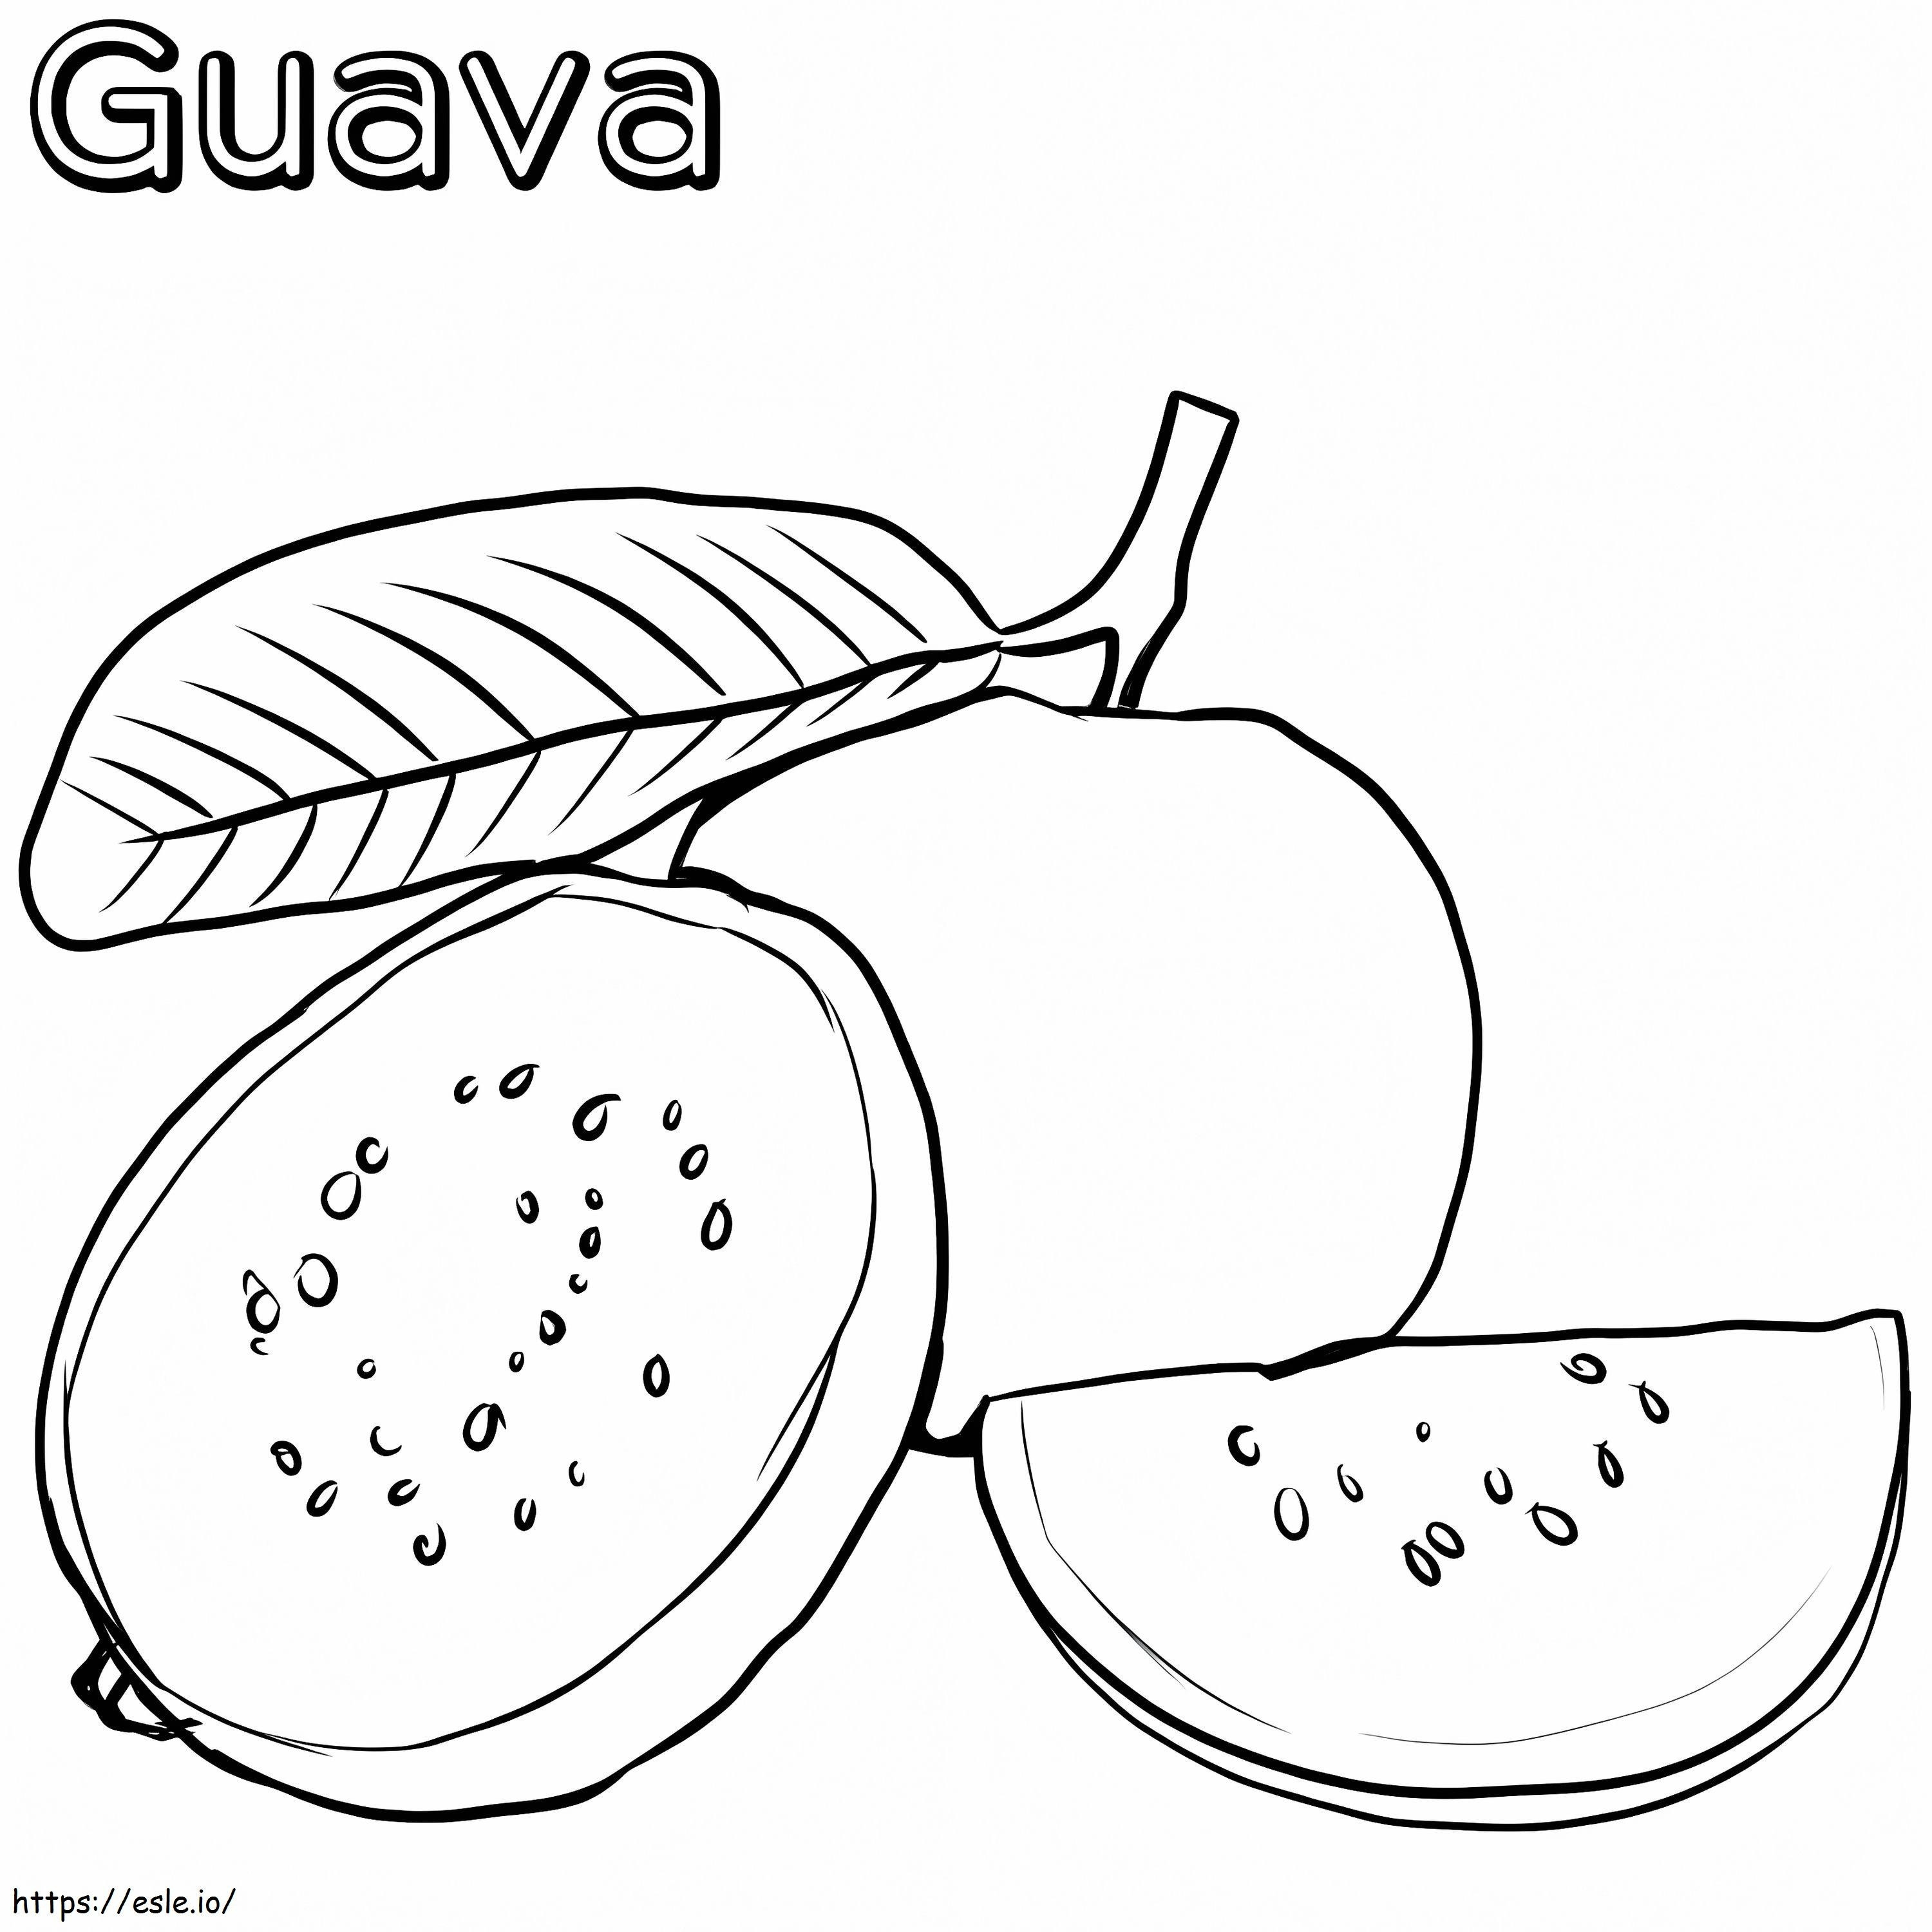 Basic Guava coloring page